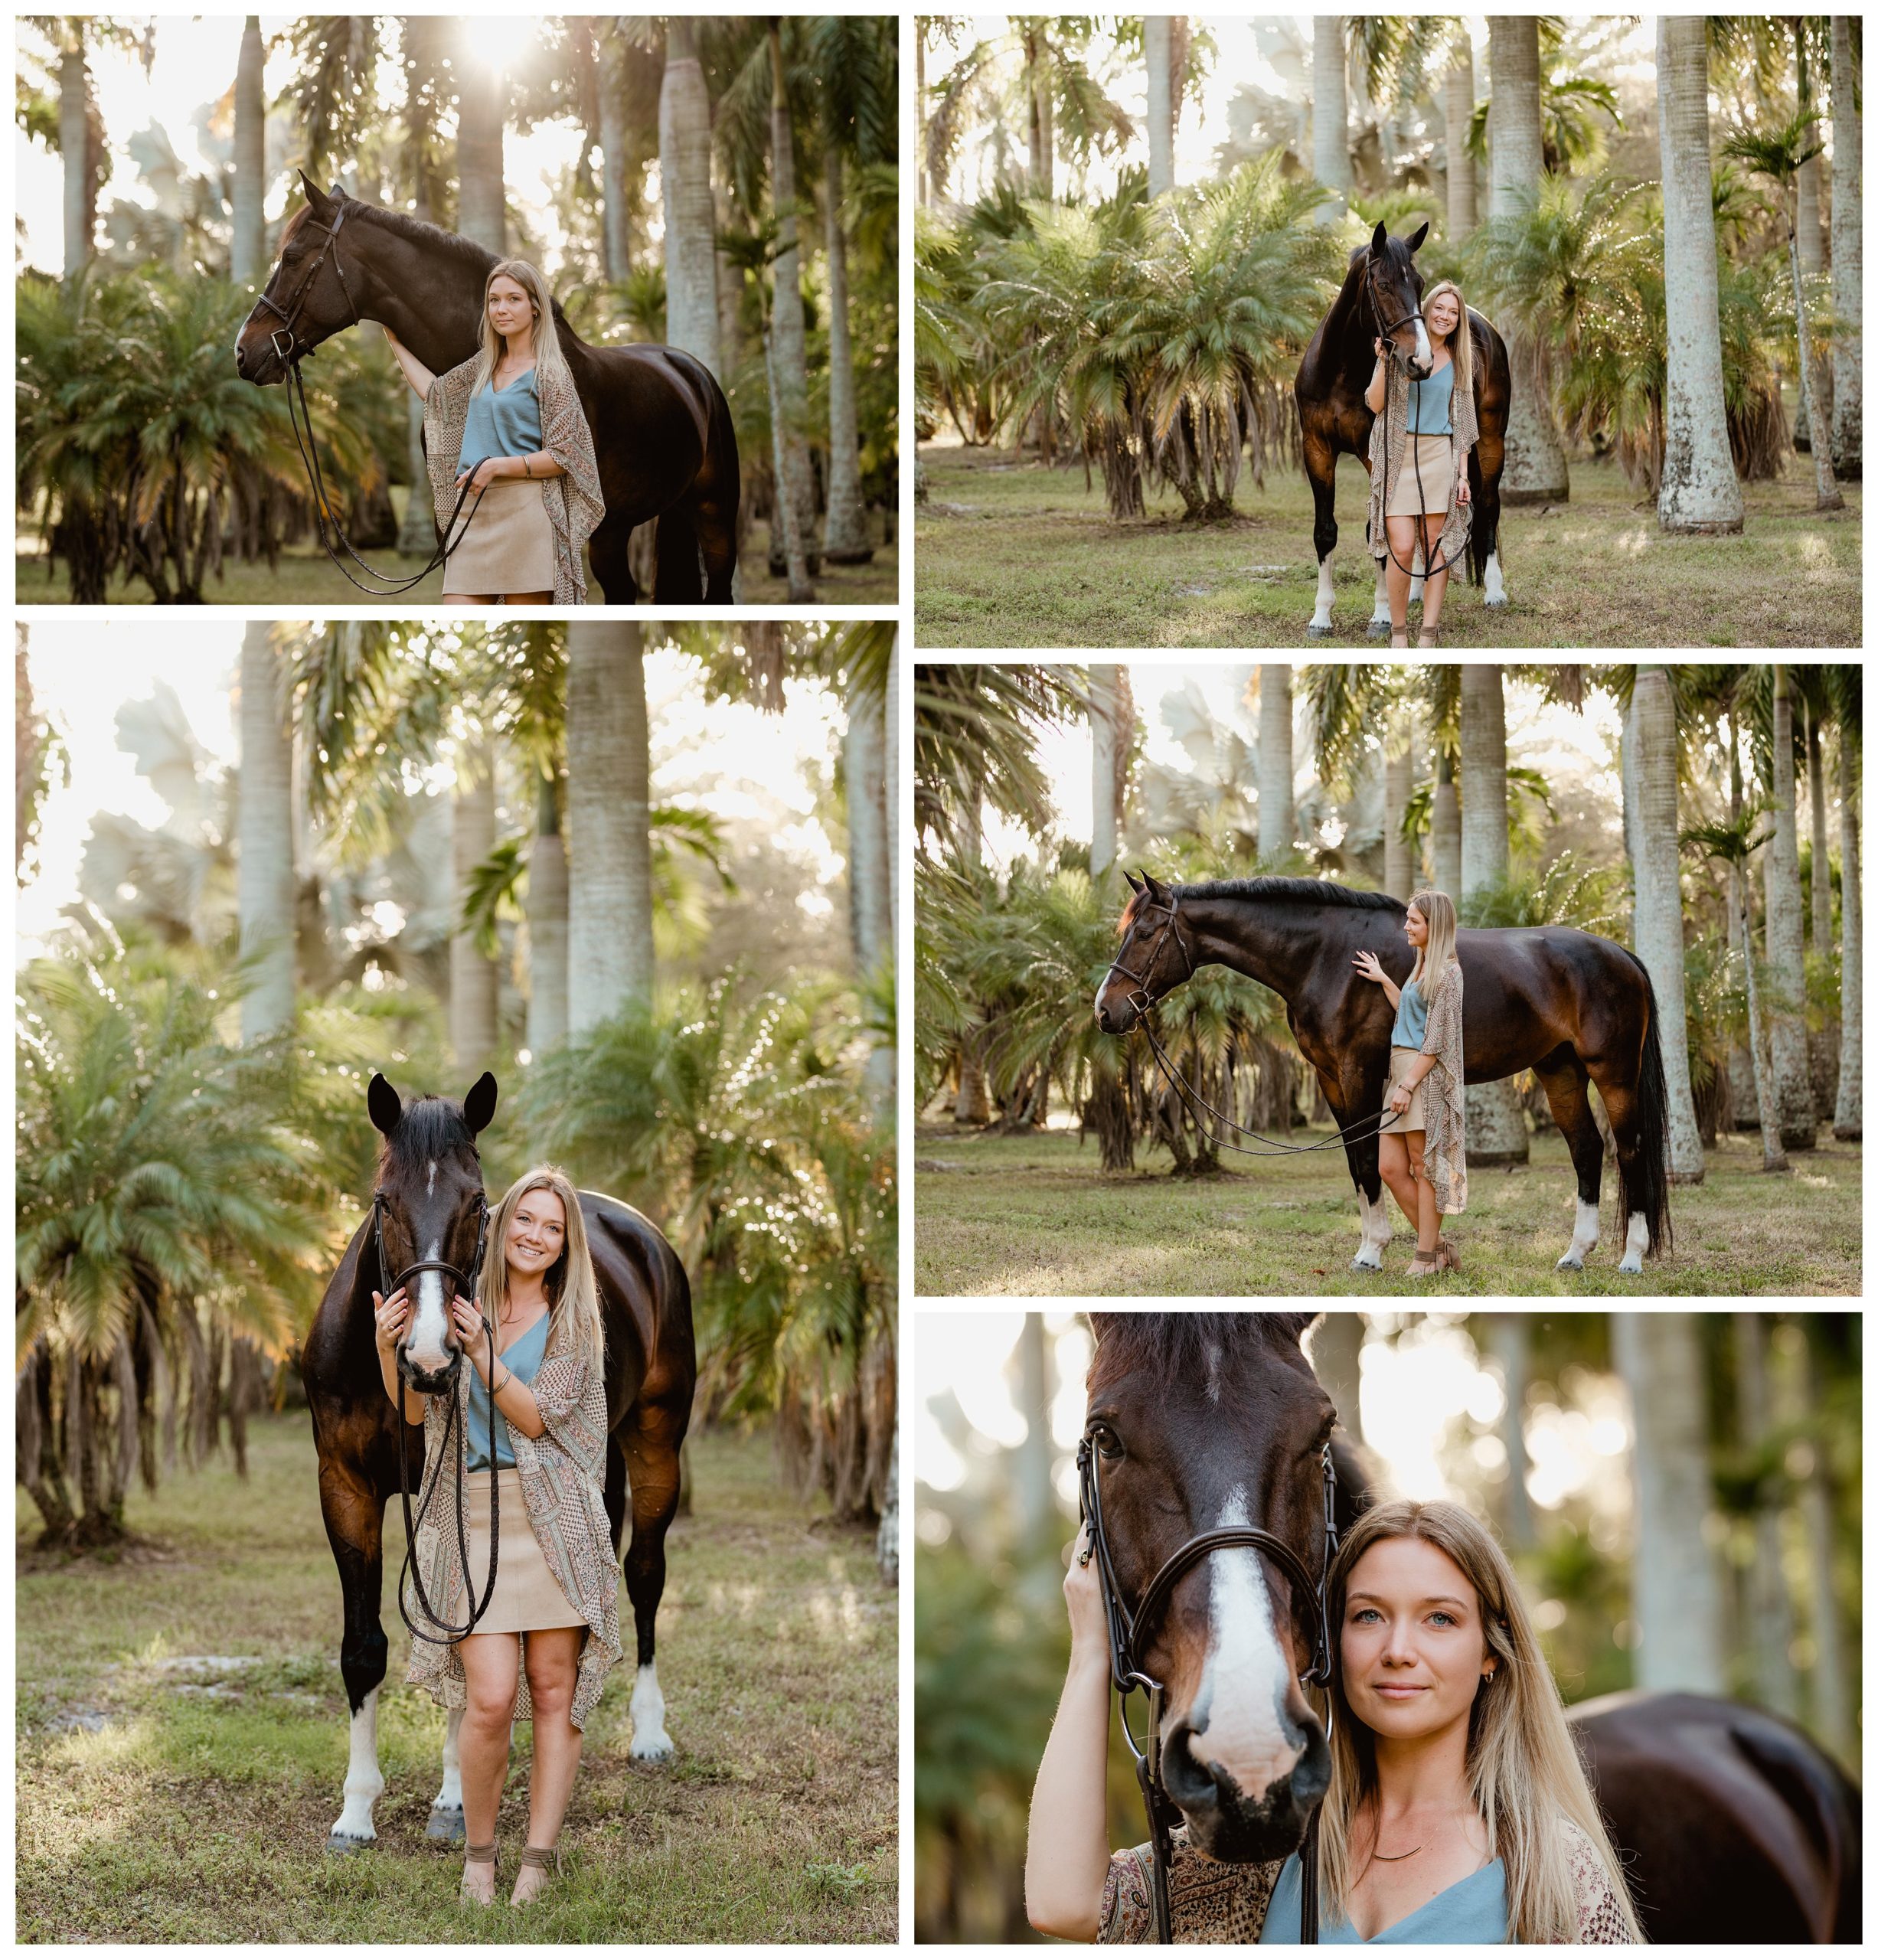 Palm trees and horses in the beautiful wellington, Florida!